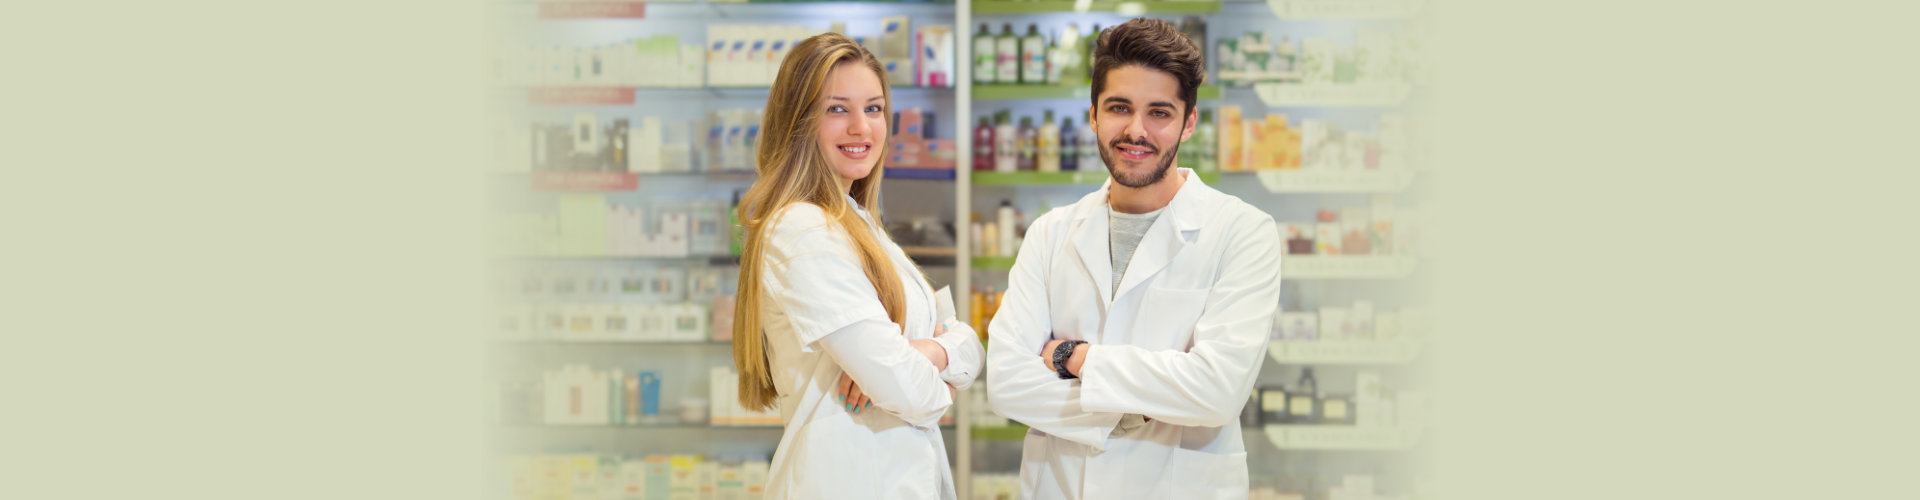 man and woman standing on the pharmacy